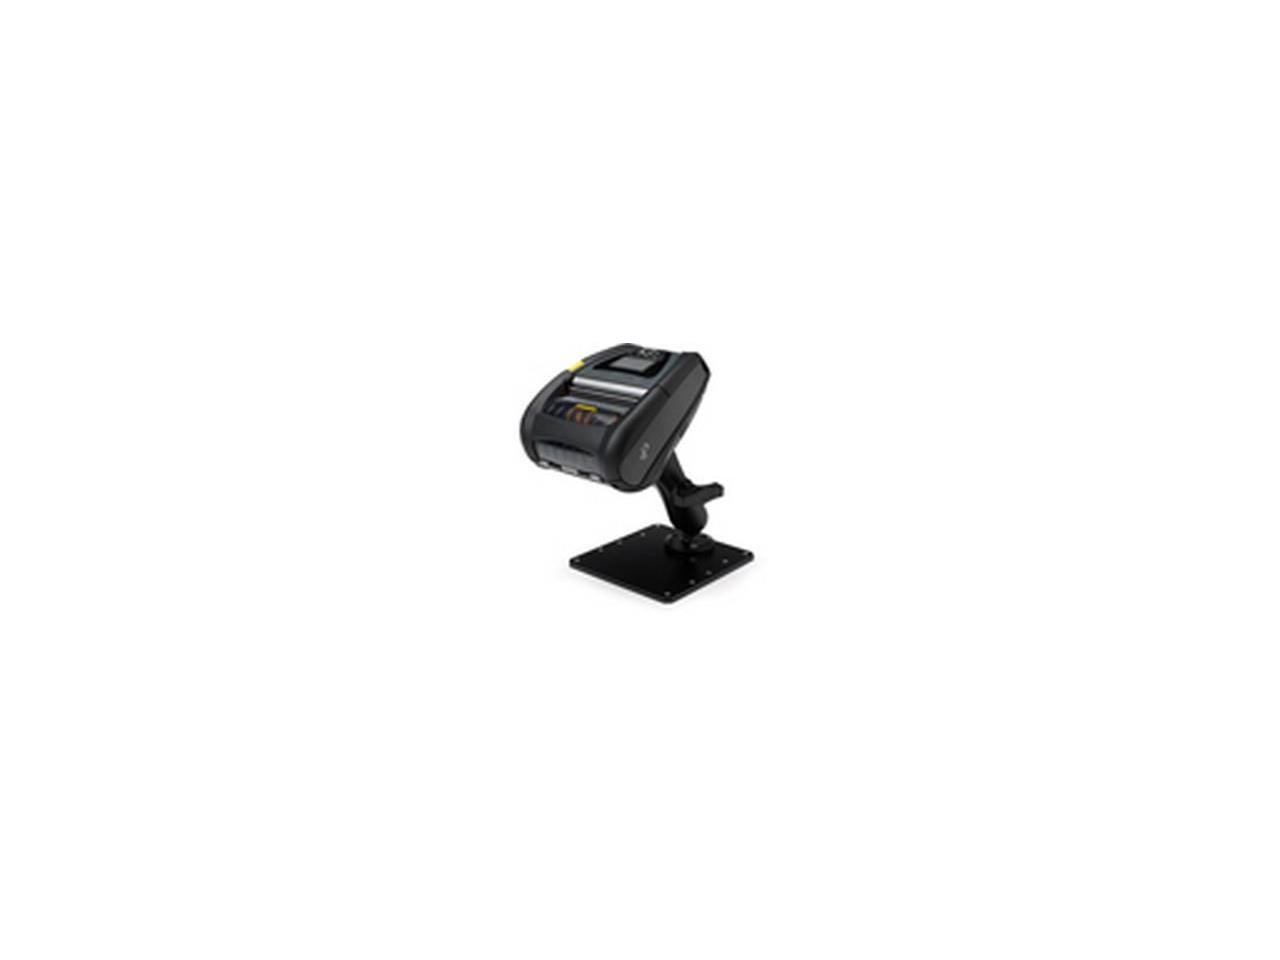 Zebra P1050667 033 Qln420 Handi Mount With Ram Mount Arm With Out Base Plate 4790